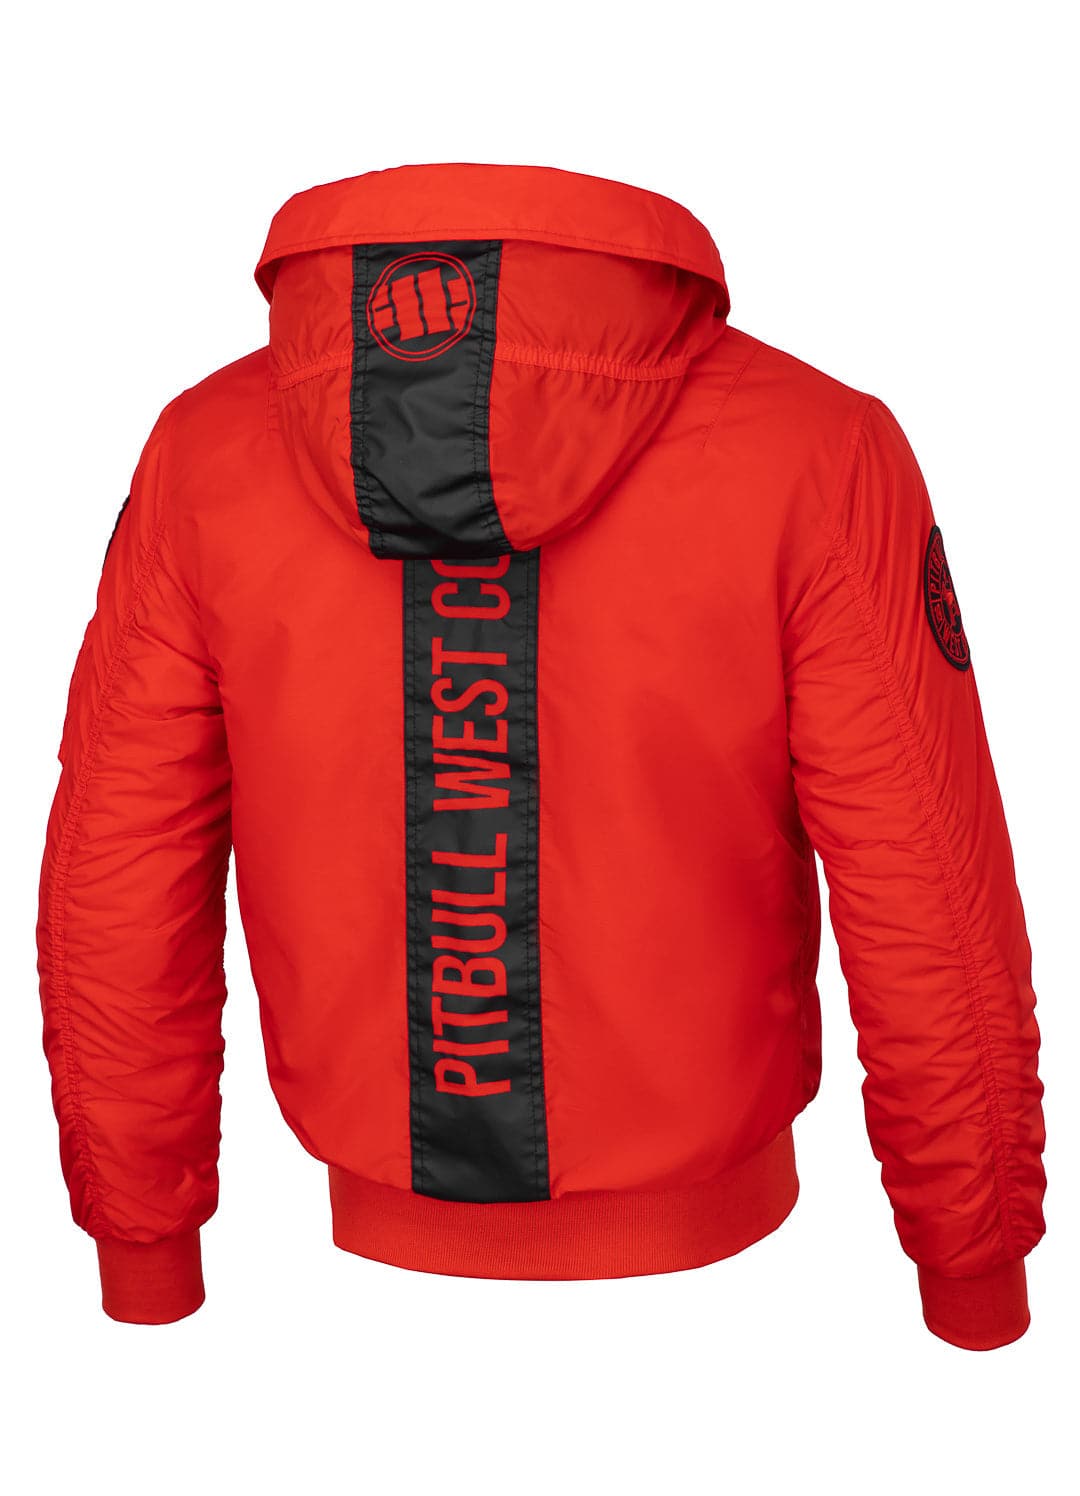 BEEJAY Flame Red Jacket.